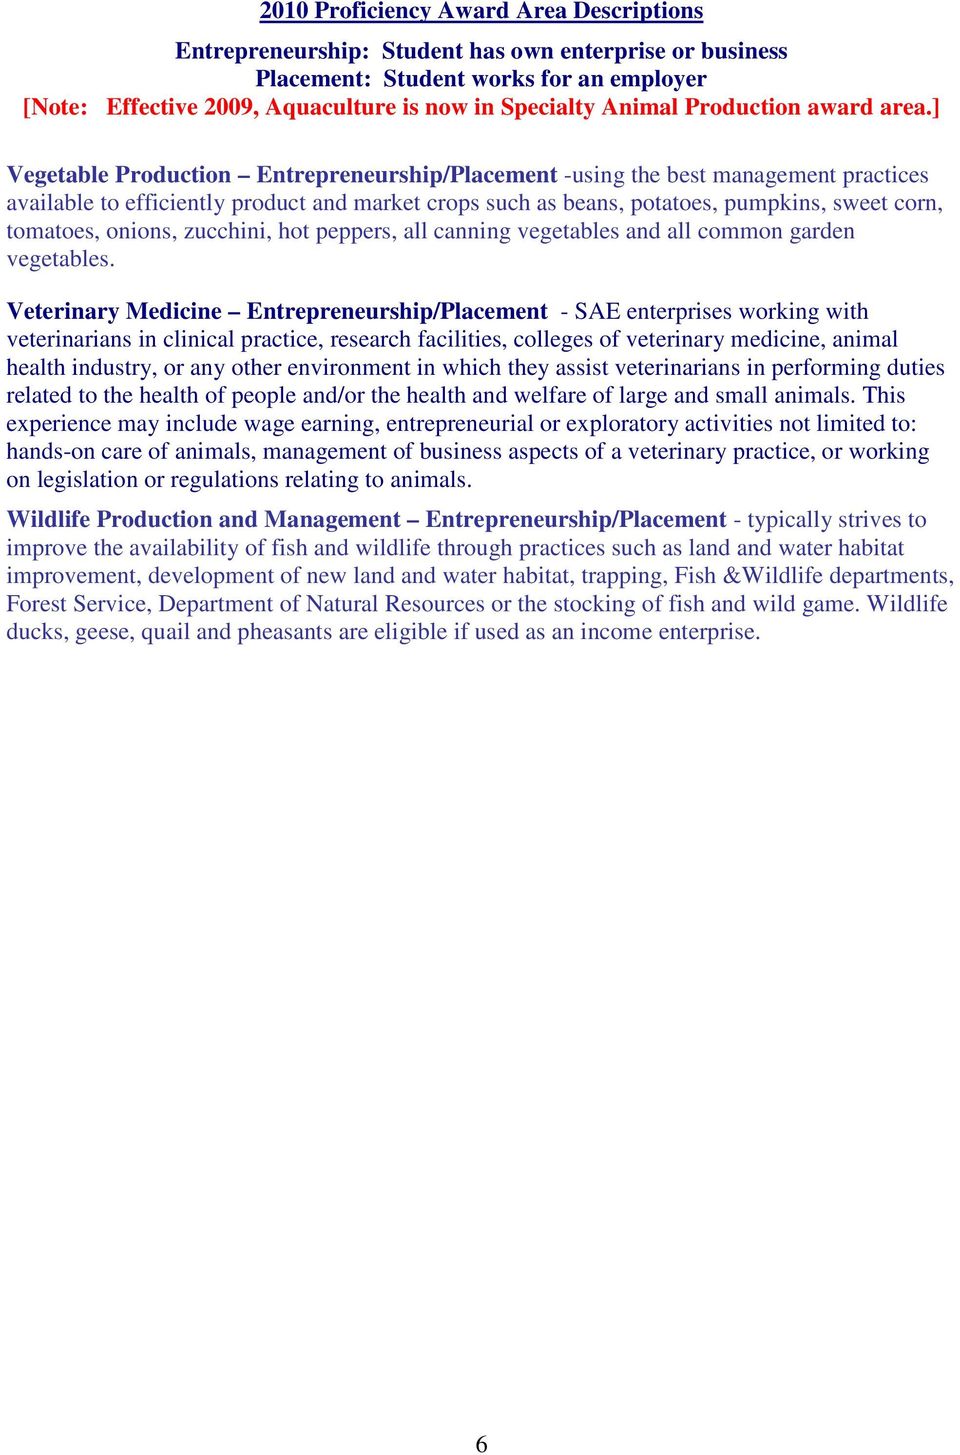 Veterinary Medicine Entrepreneurship/Placement - SAE enterprises working with veterinarians in clinical practice, research facilities, colleges of veterinary medicine, animal health industry, or any